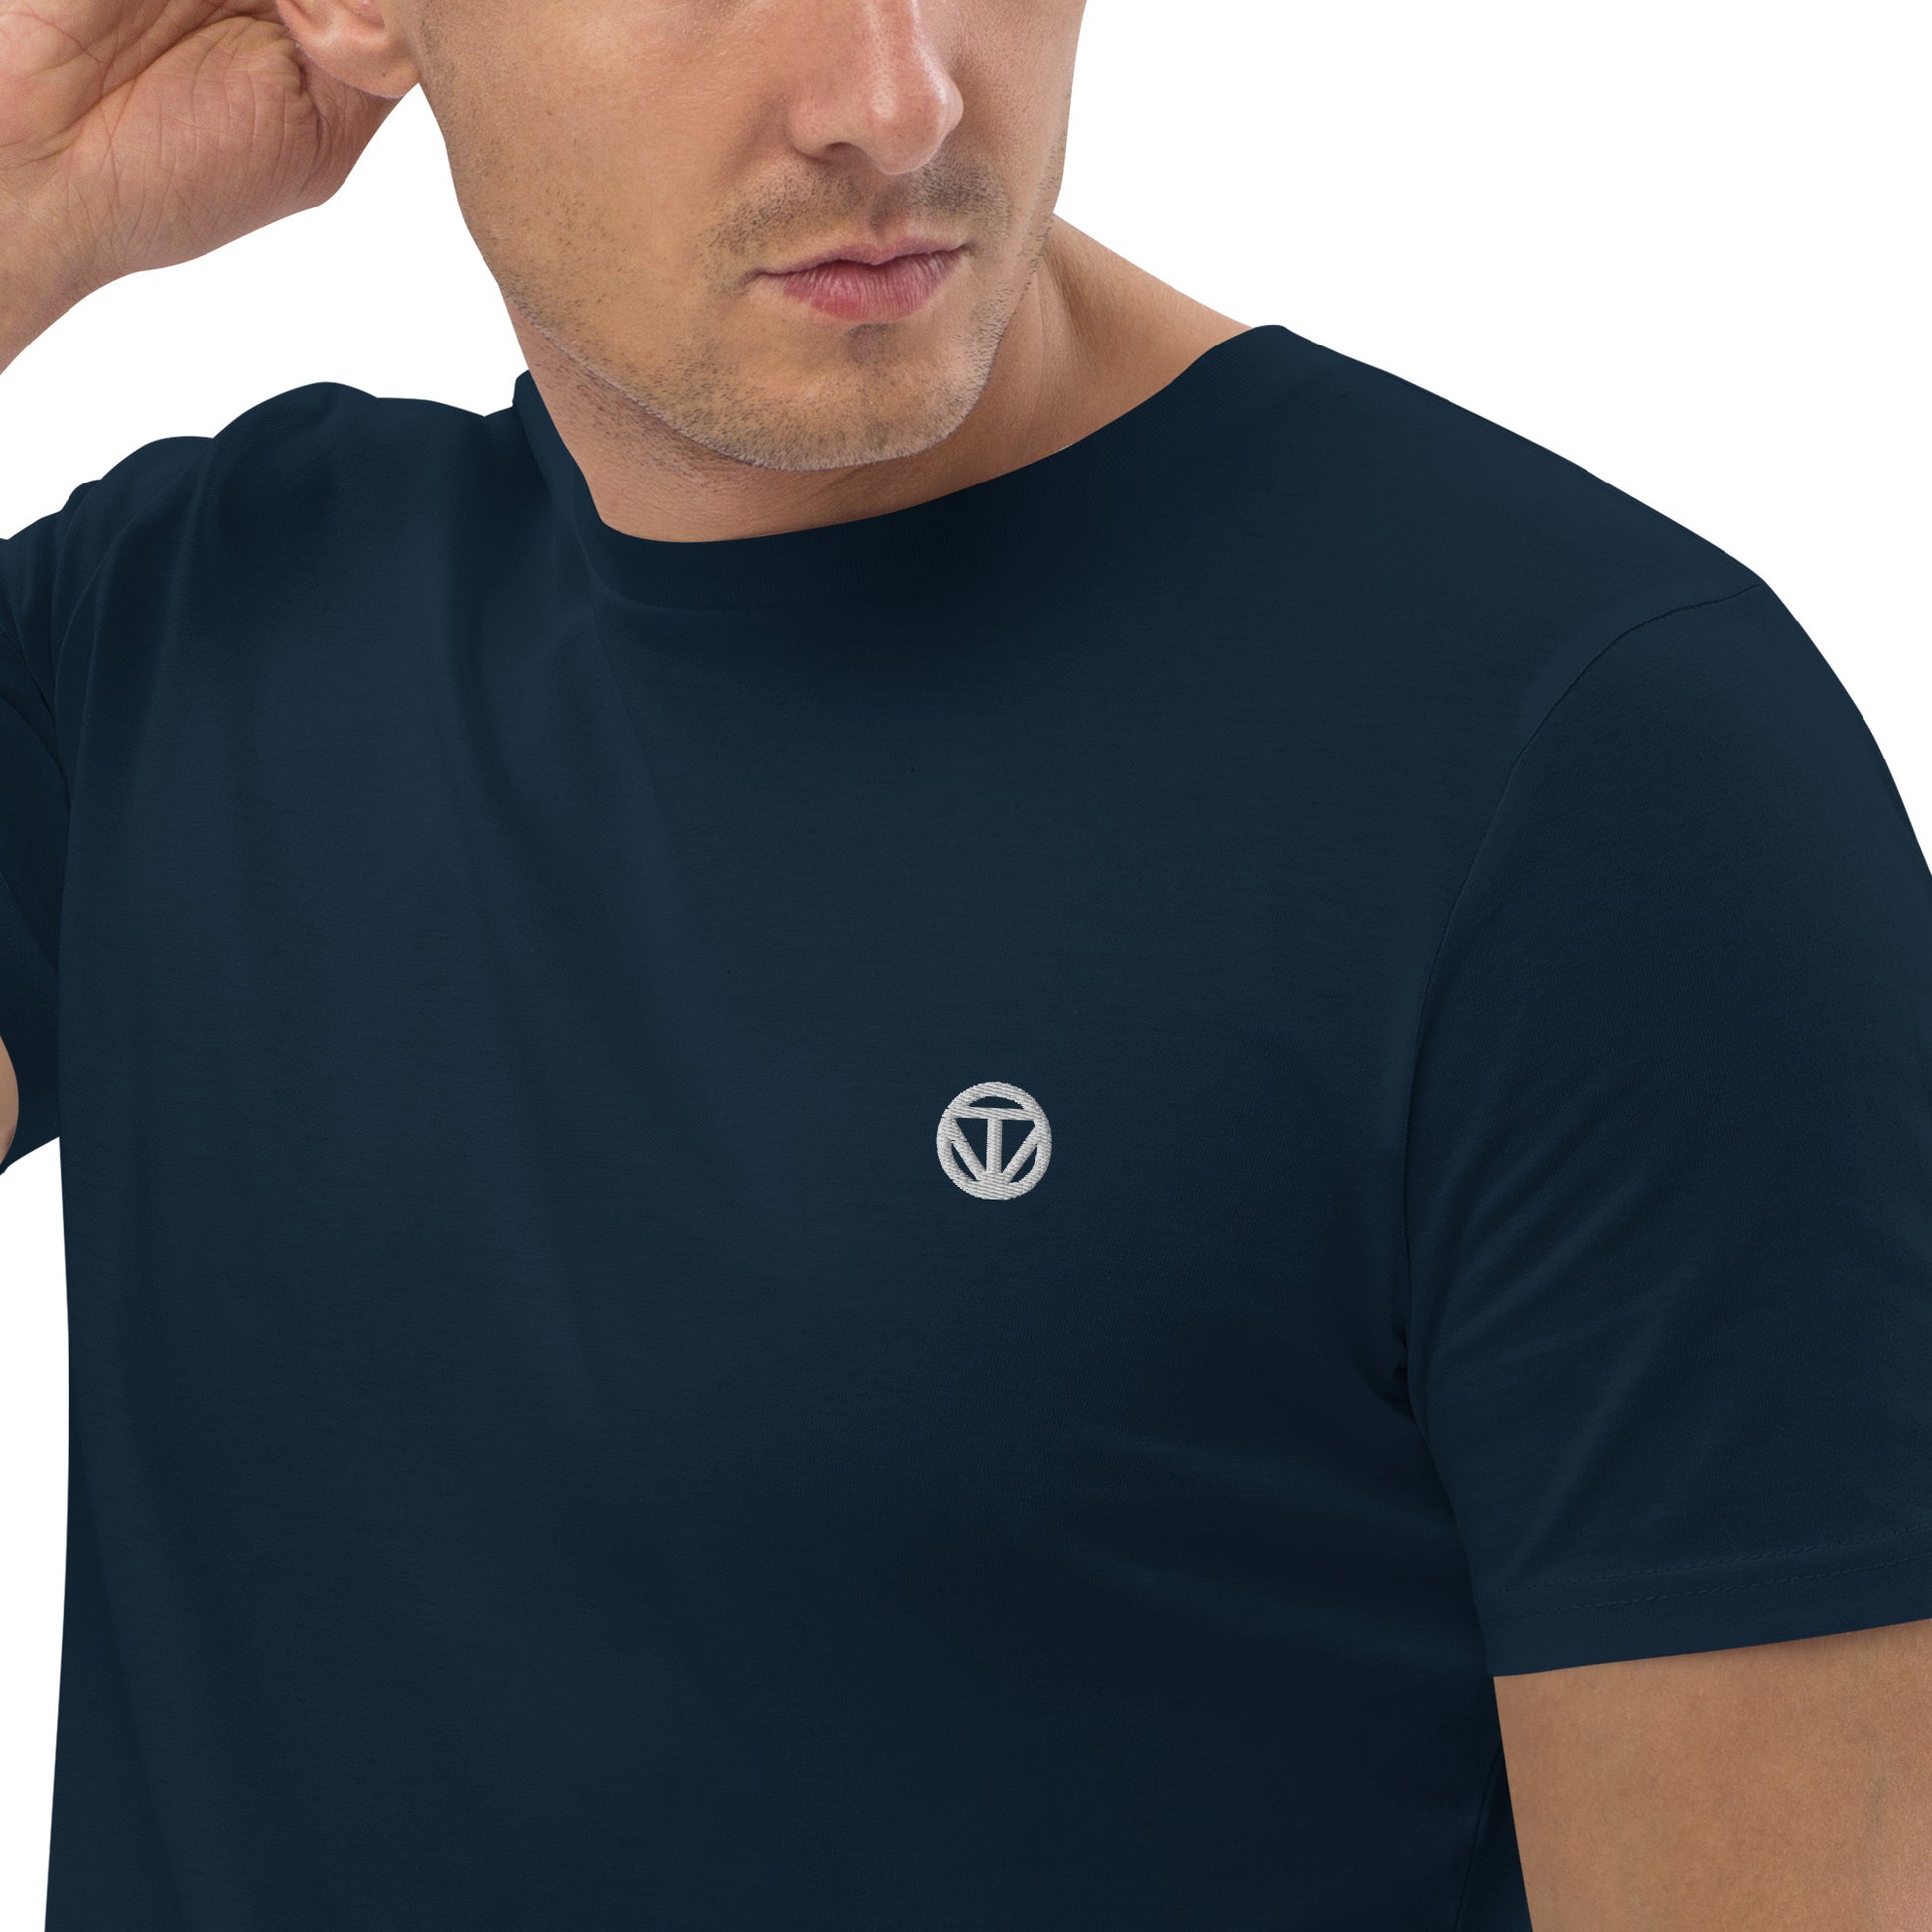 TIME OF VIBES - Organic Cotton T-Shirt (Navy/White) - €33.50